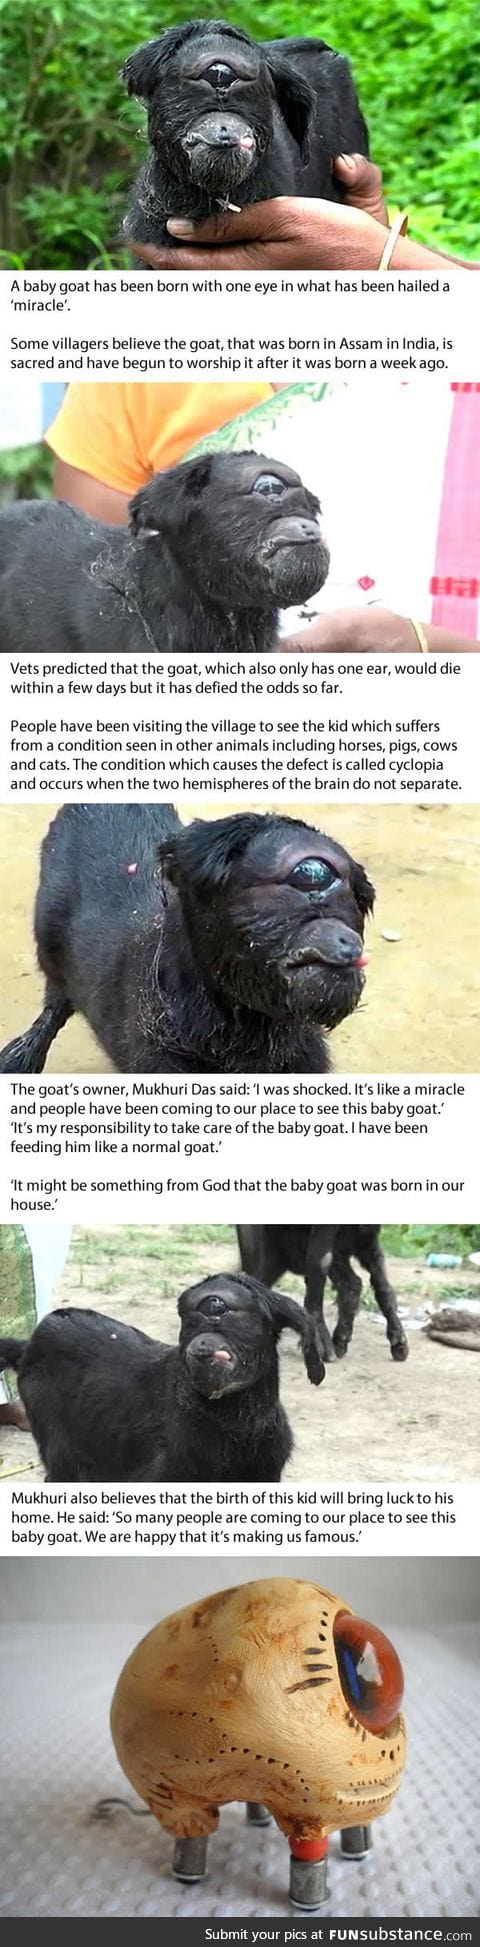 Cyclops goat born with one eye is worshipped by villagers in India